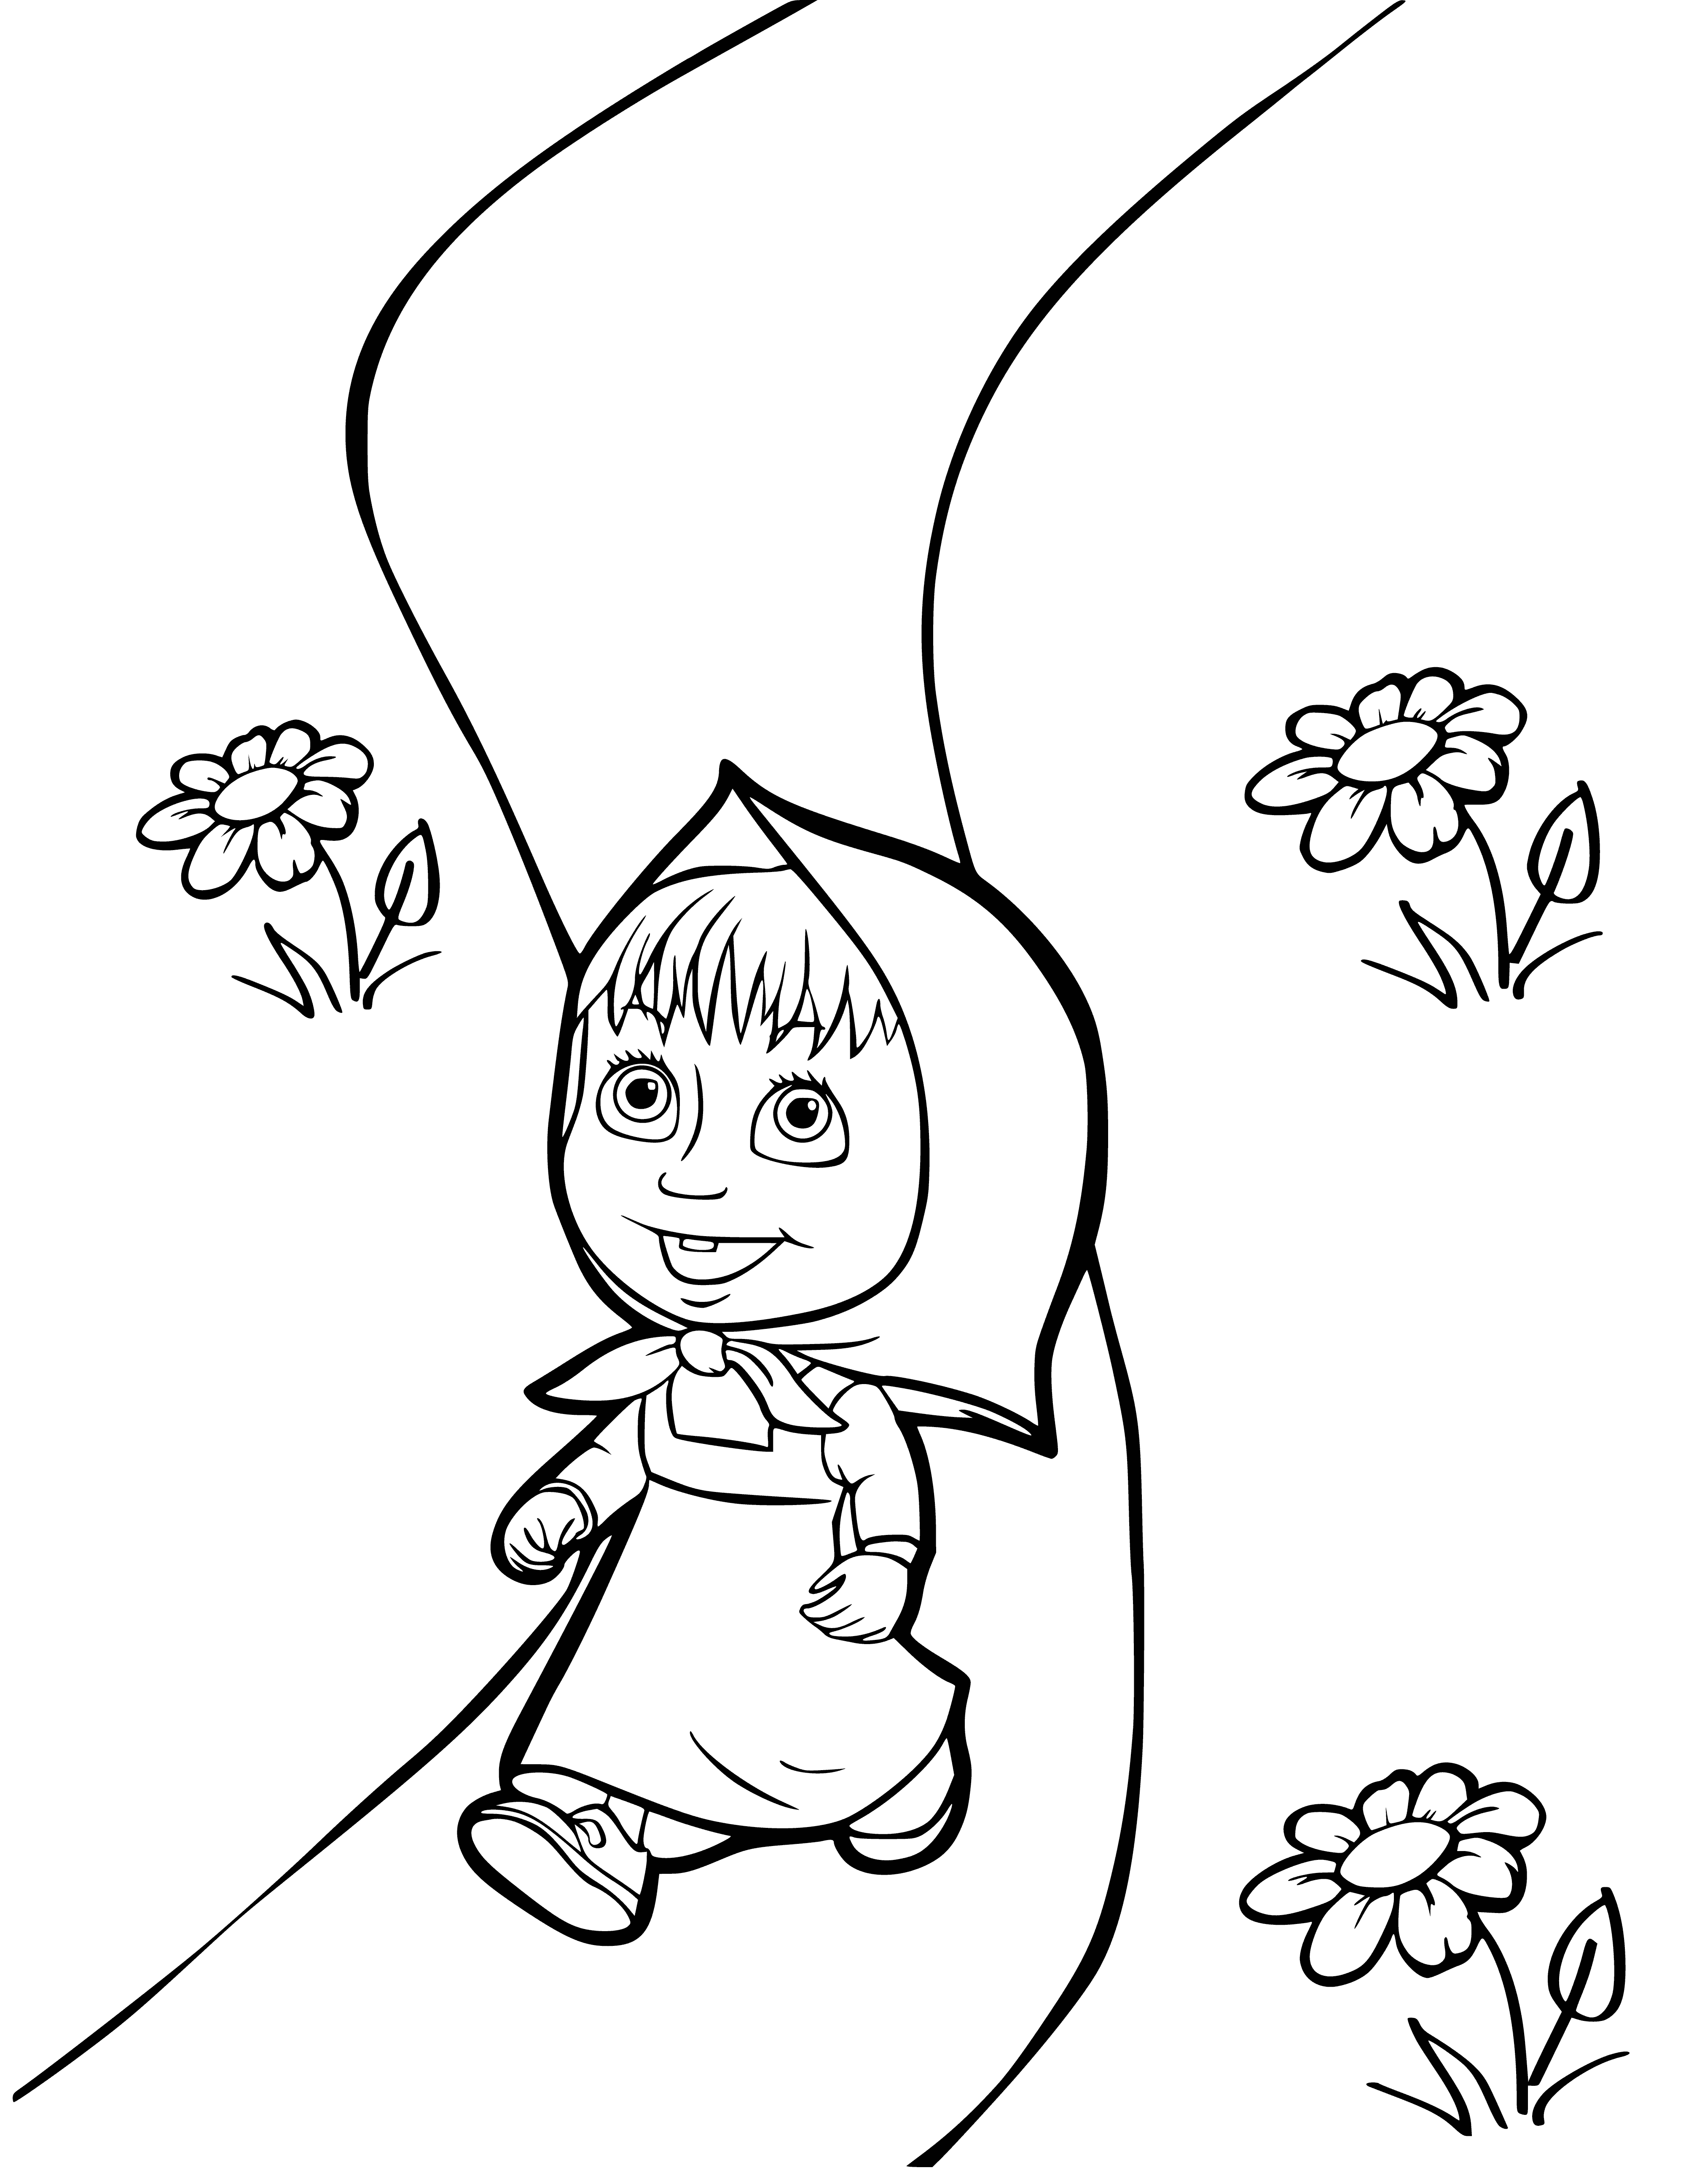 coloring page: Masha meets a grumpy brown bear while picking berries, wearing her red coat, blue scarf and hat.